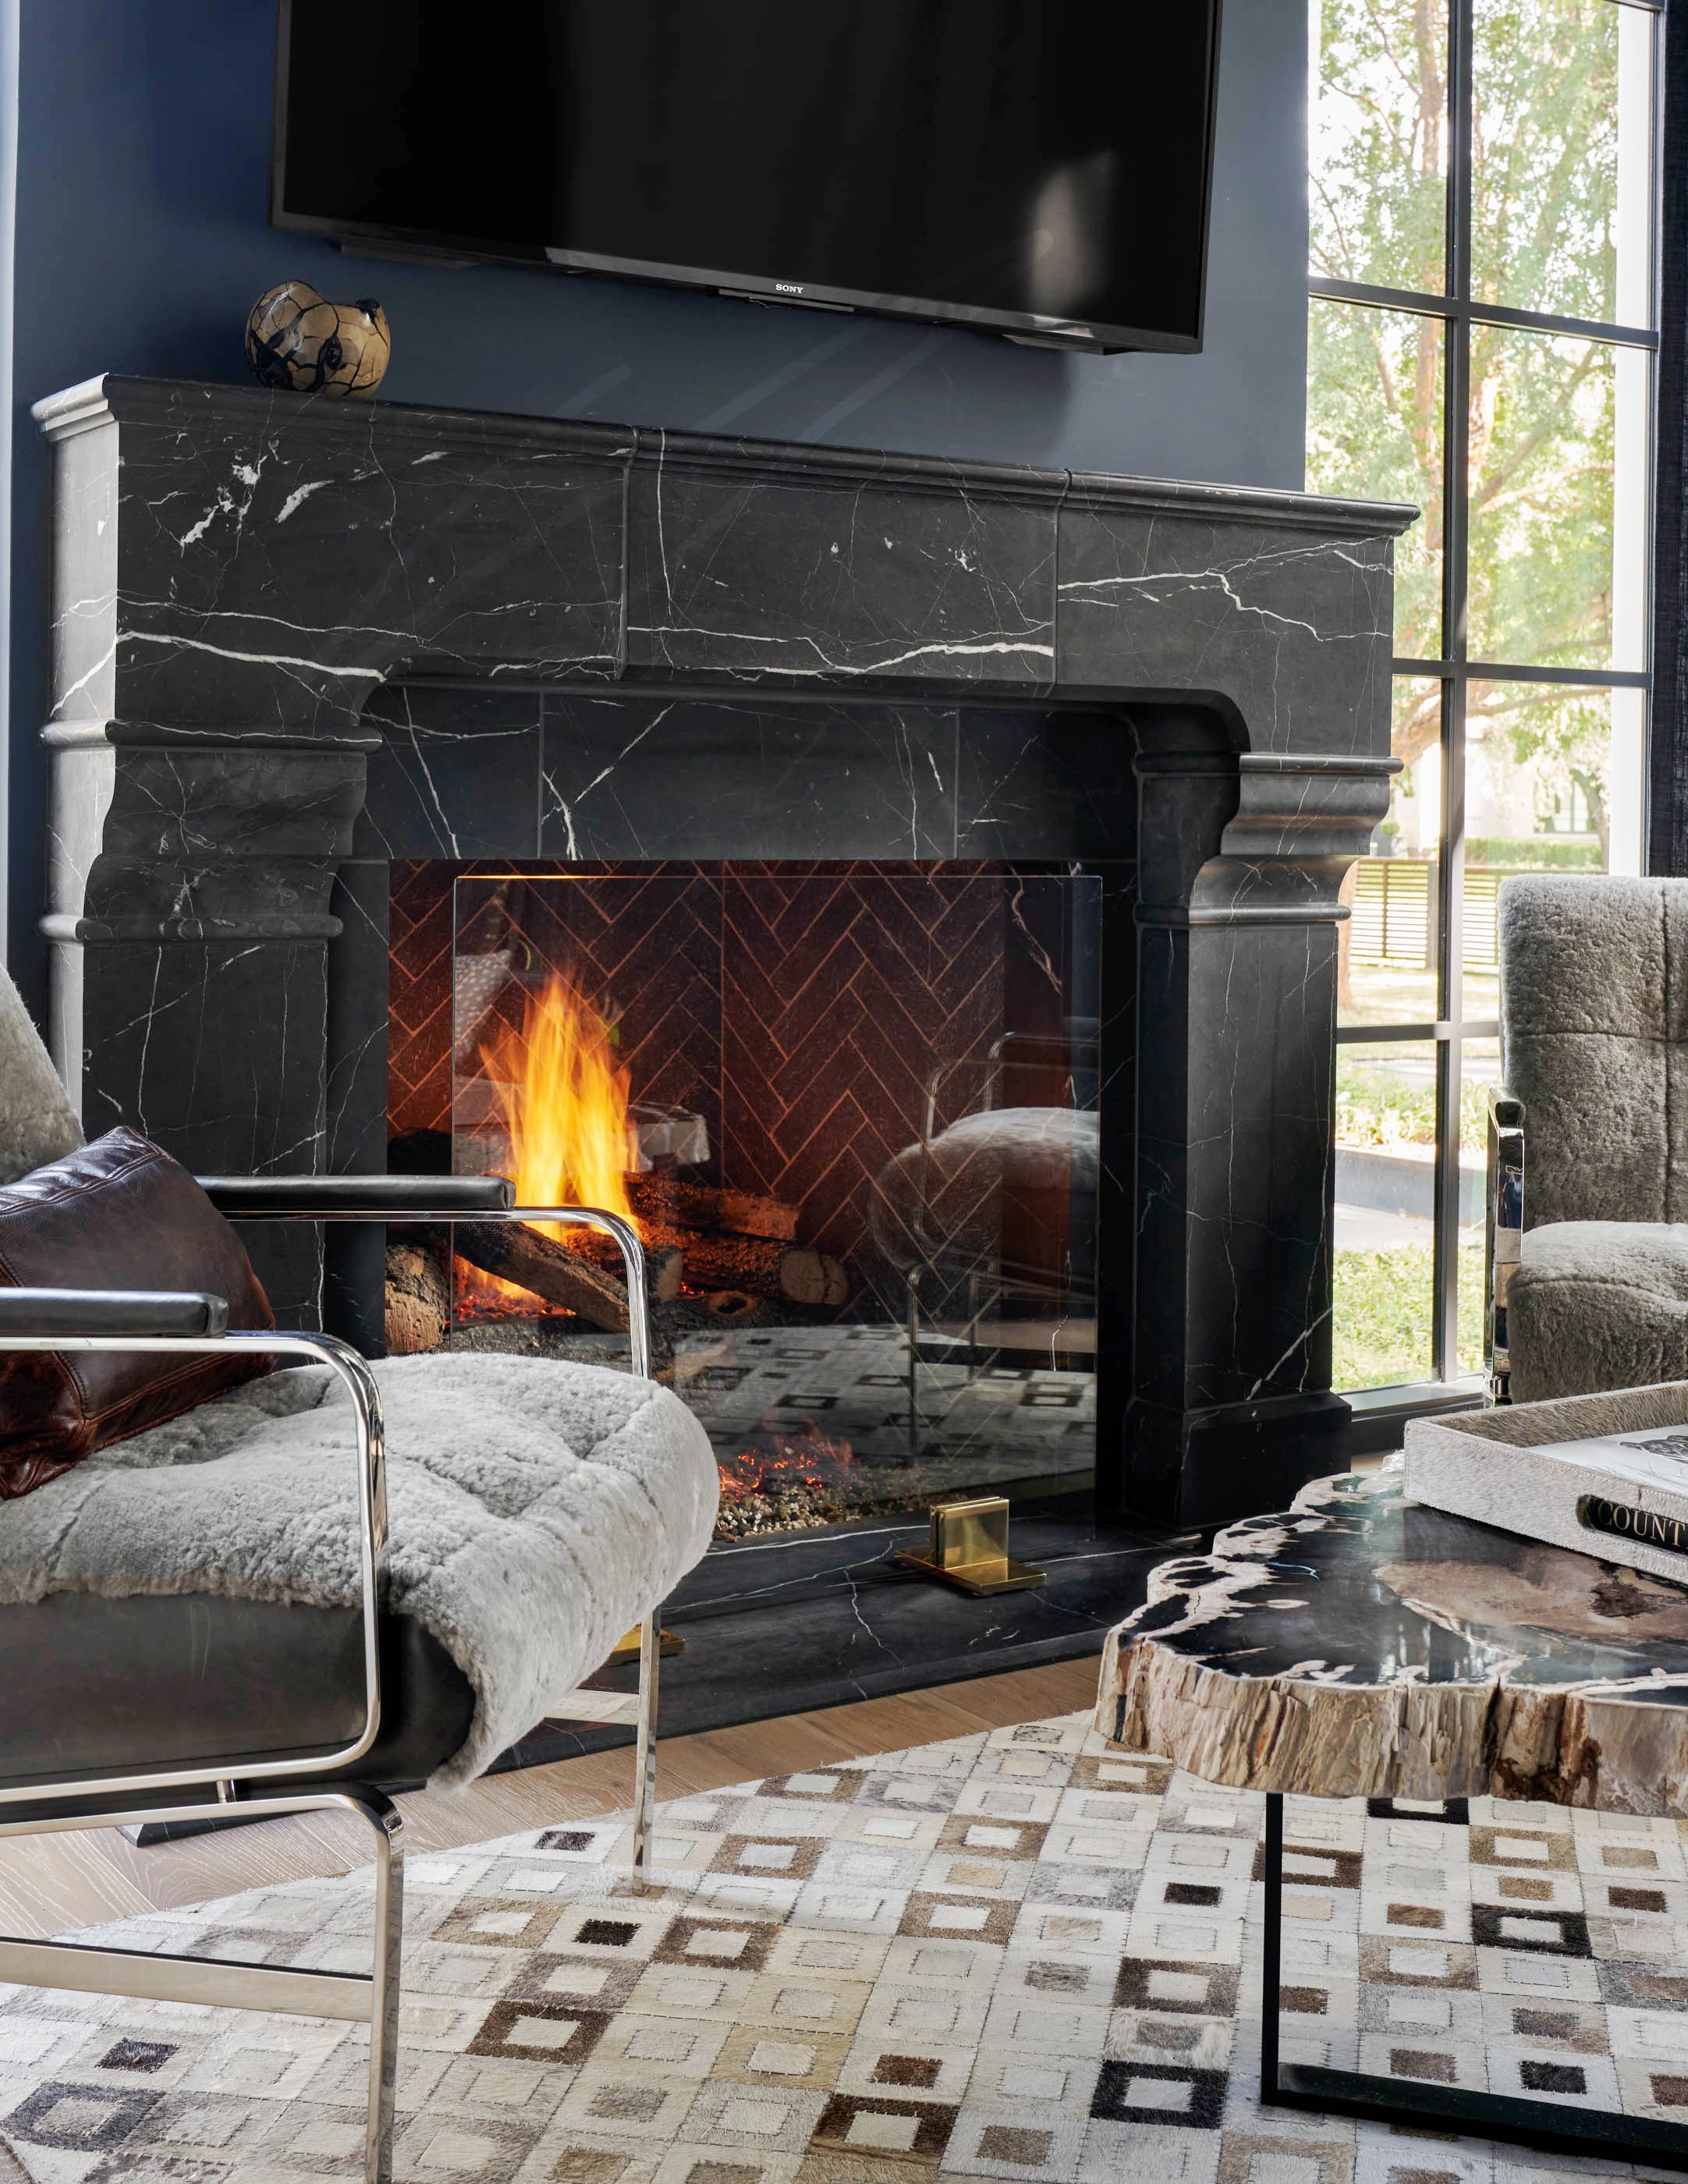 *Note: This screen is best for gas burning fireplaces only.

The Quinn Fireplace Screen's tempered glass panel allows the fire to be enjoyed while protecting the surrounding area from heat and sparks. The iron block feet with a powder-coated